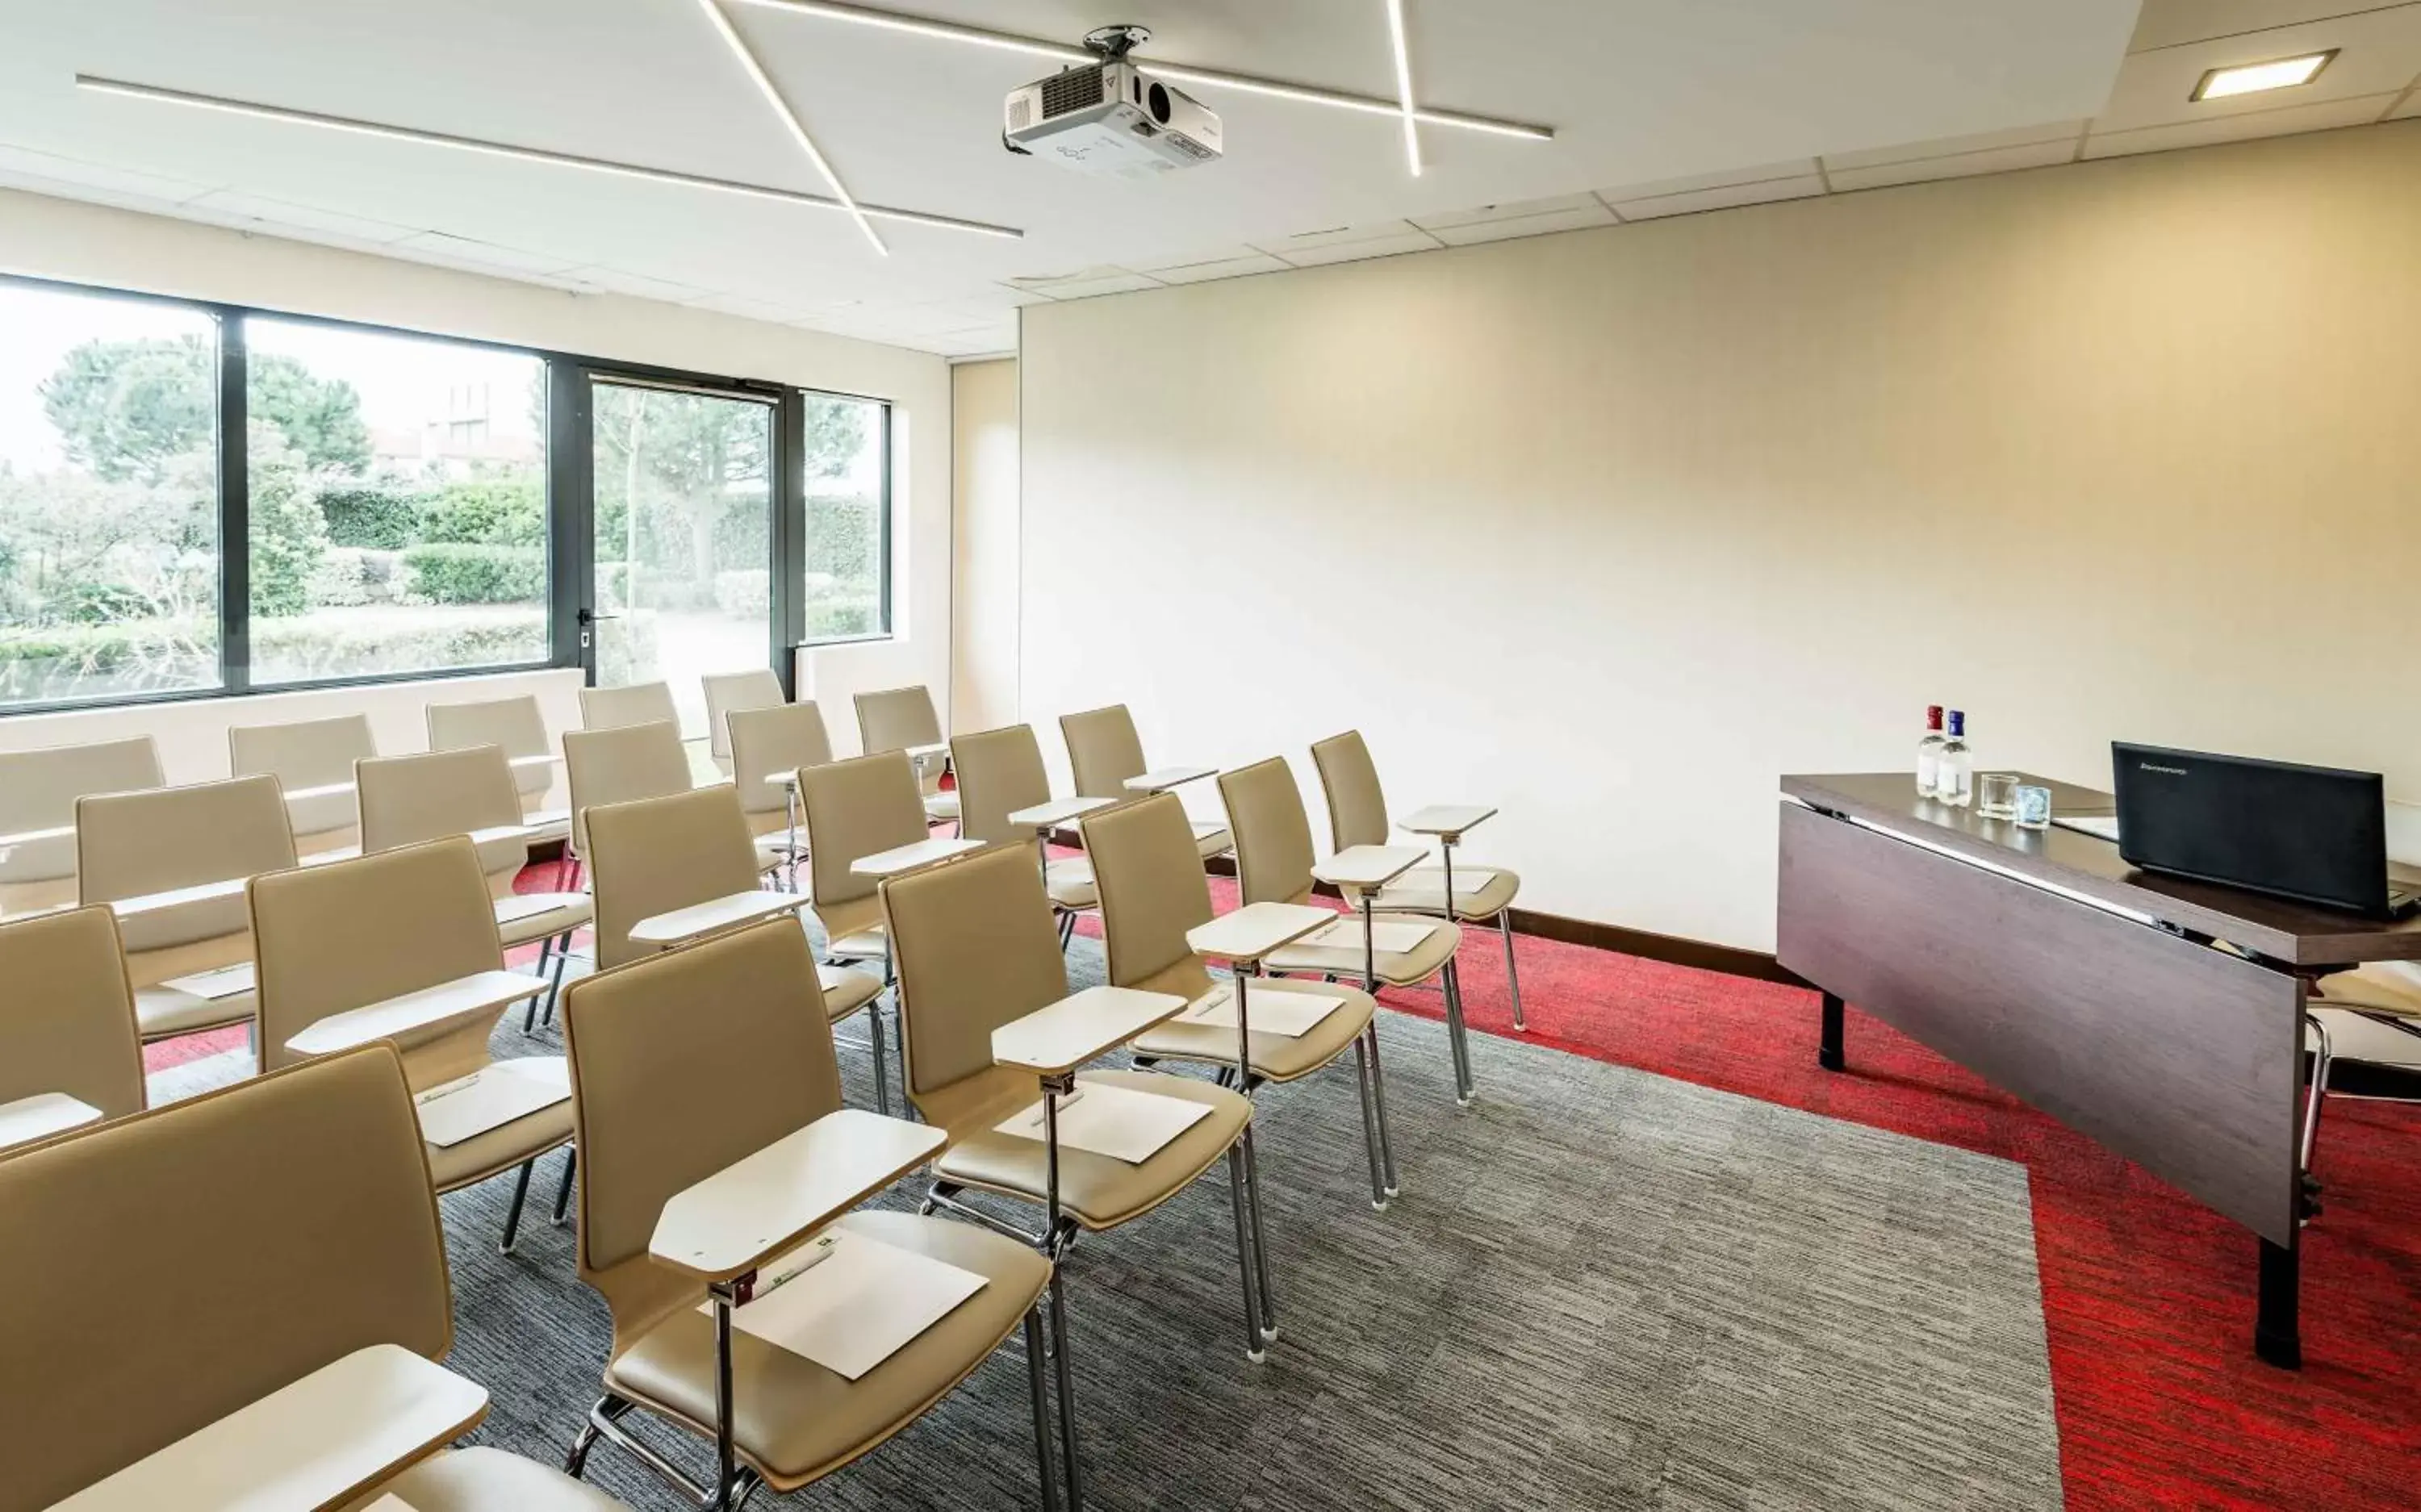 Meeting/conference room in Holiday Inn Toulouse Airport, an IHG Hotel